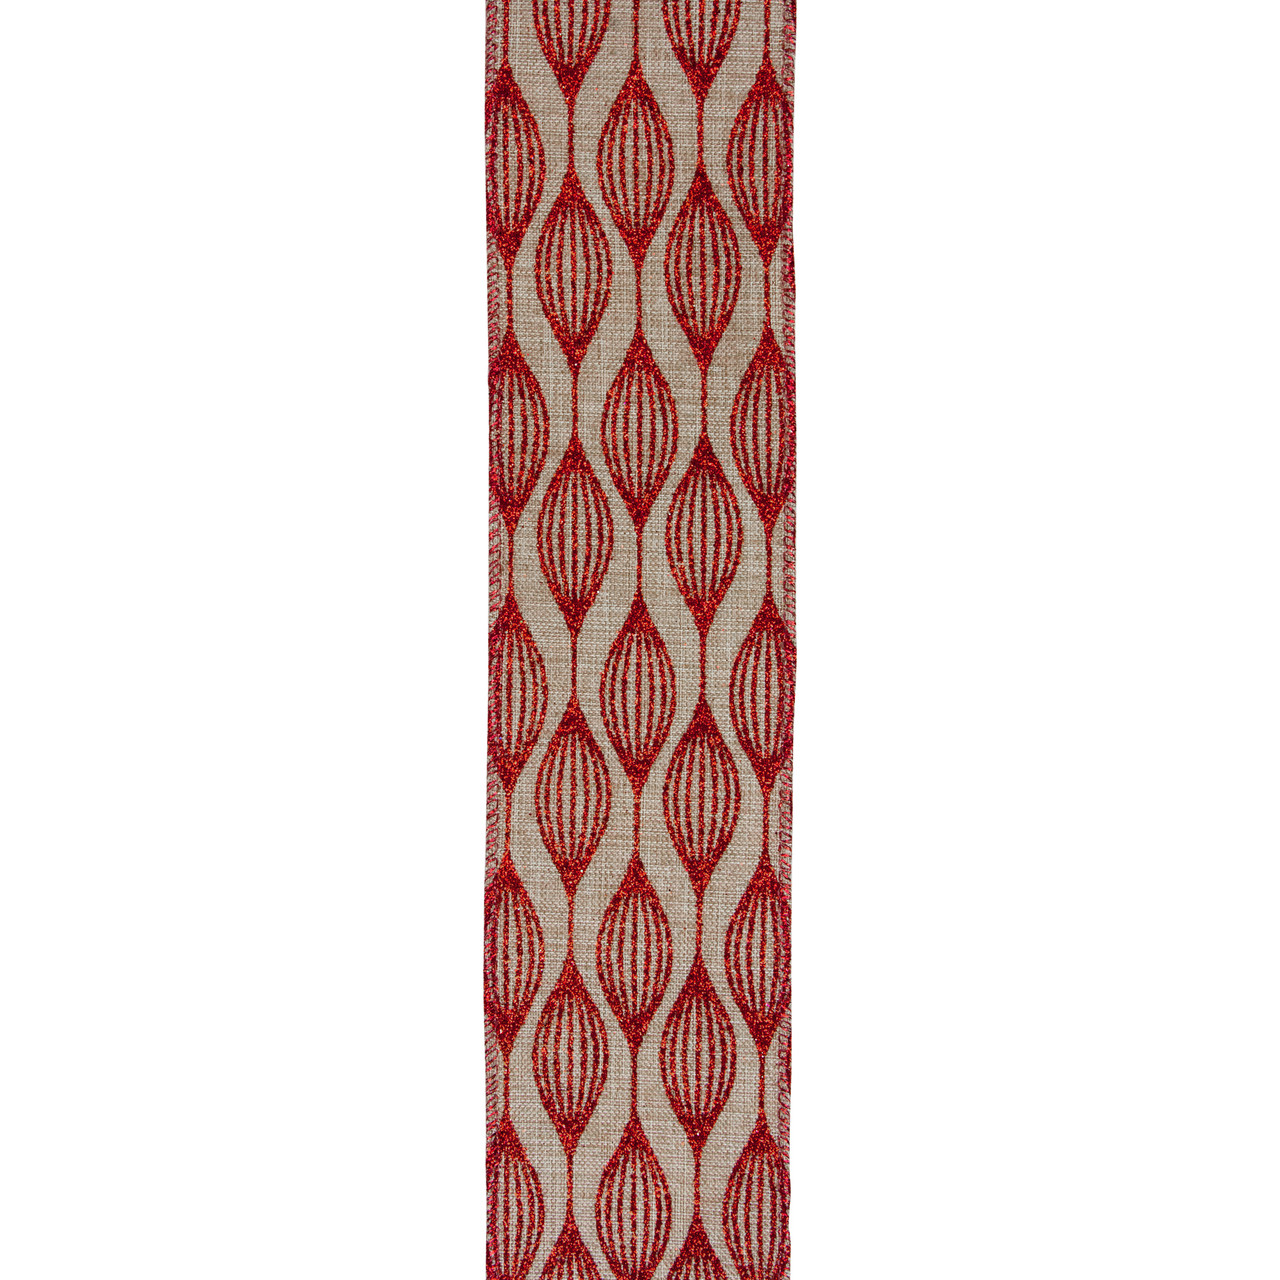 Northlight Faded Rustic Red and White Ikat Wired Christmas Craft Ribbon 2.5 x 120 Yards